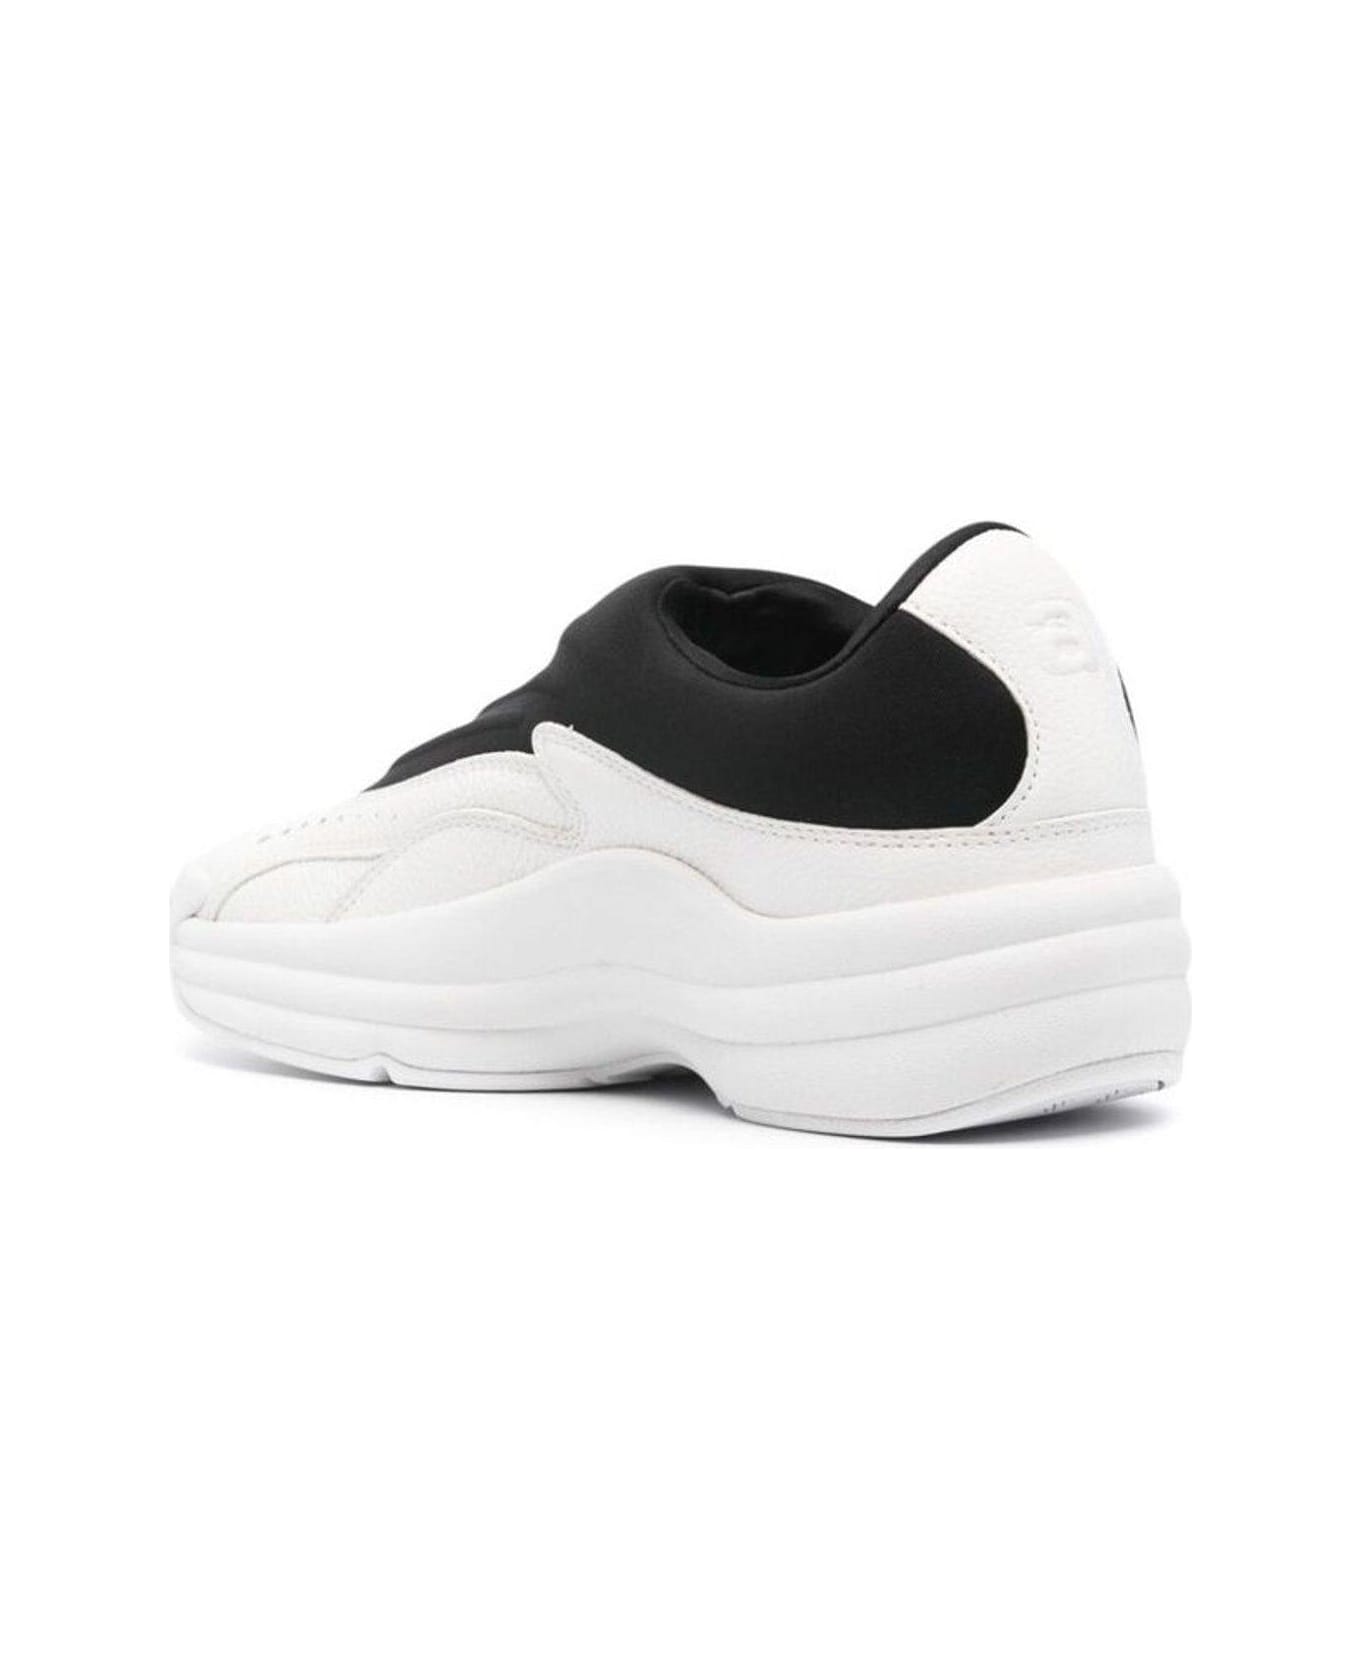 Alexander Wang Lace-up Sneakers - BLACK/WHITE スニーカー